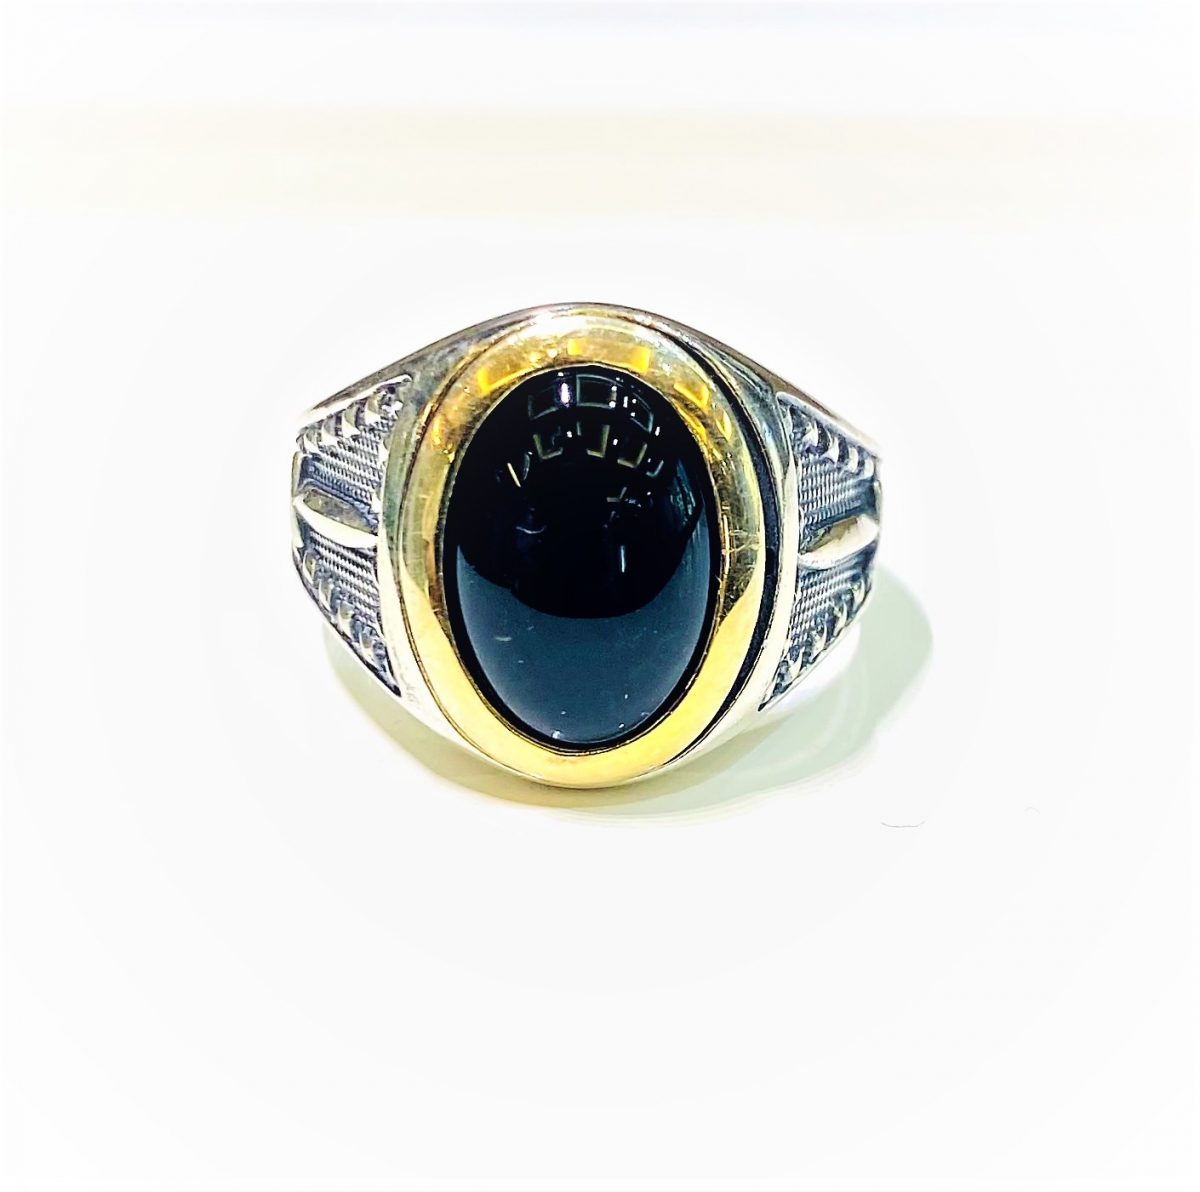 Silver Ring with black stone & sword